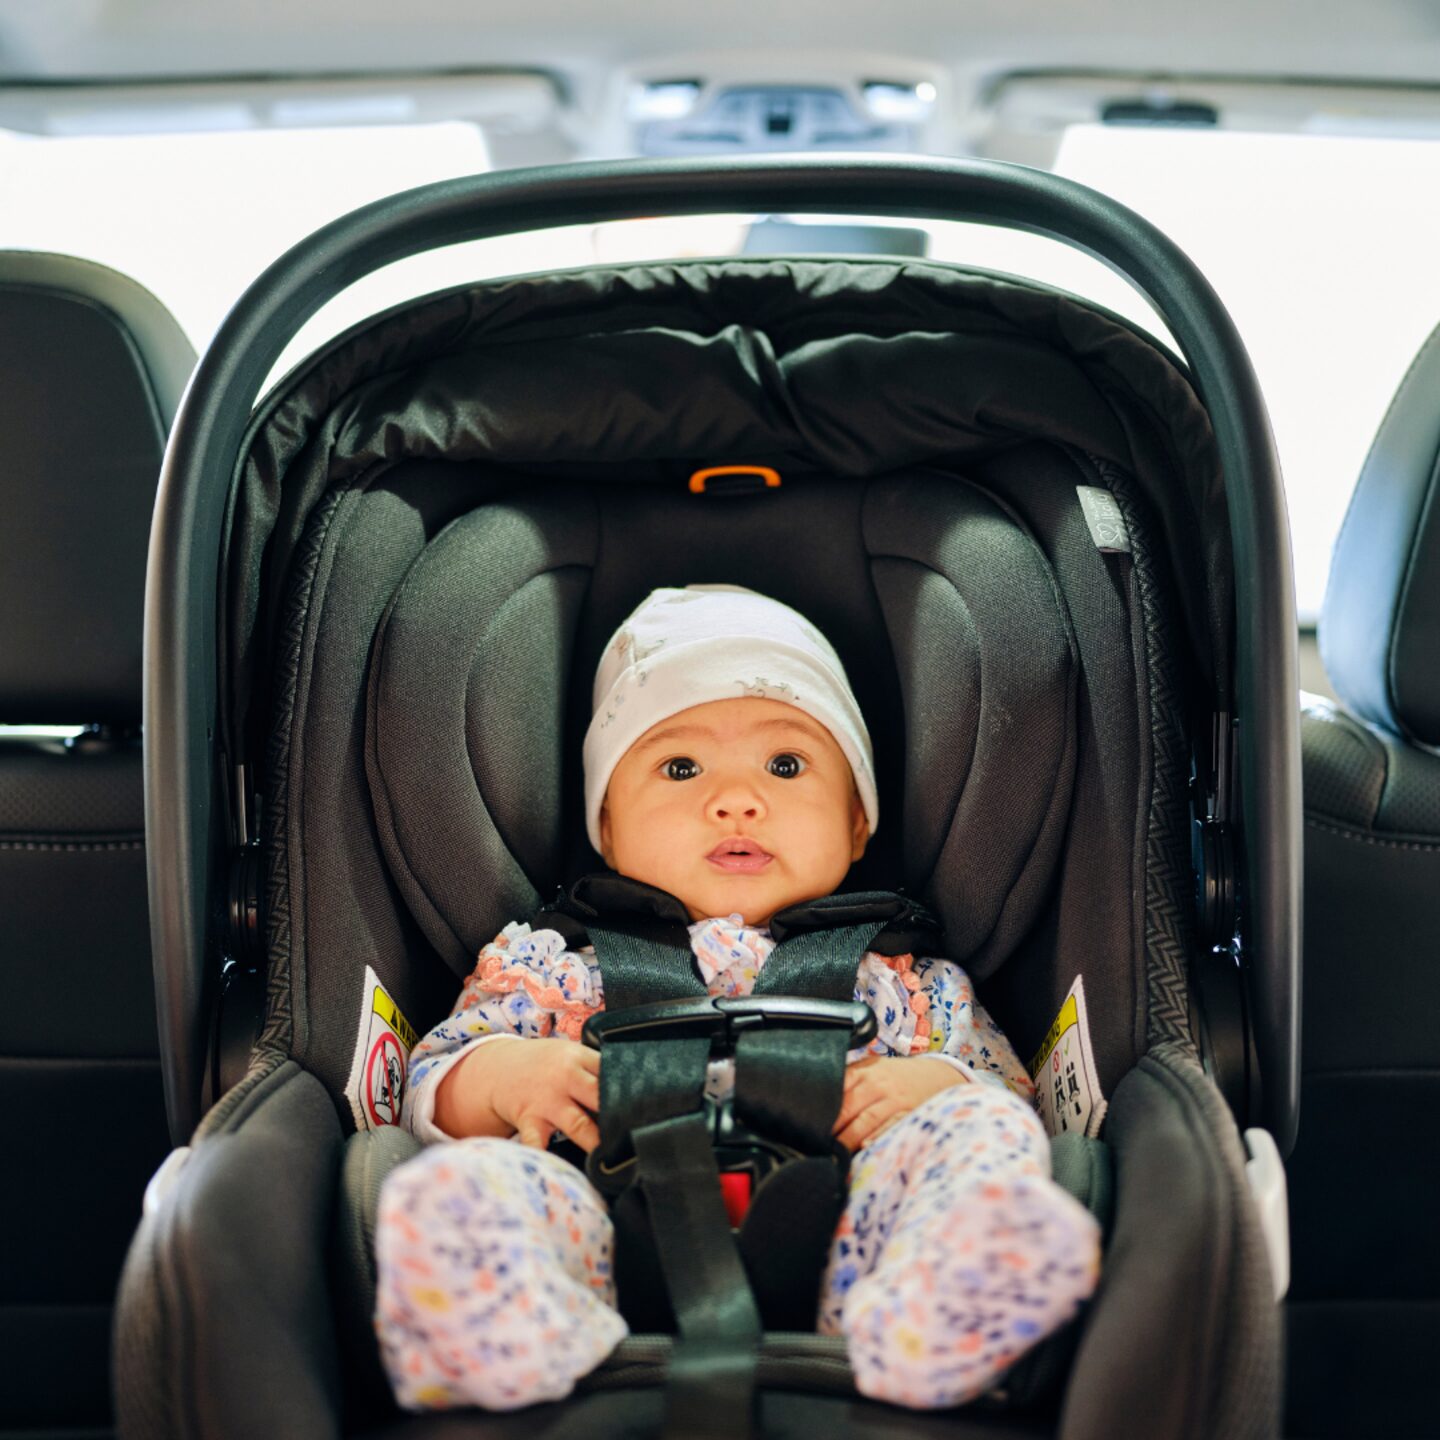 Is it okay to let your baby sleep in a car seat?